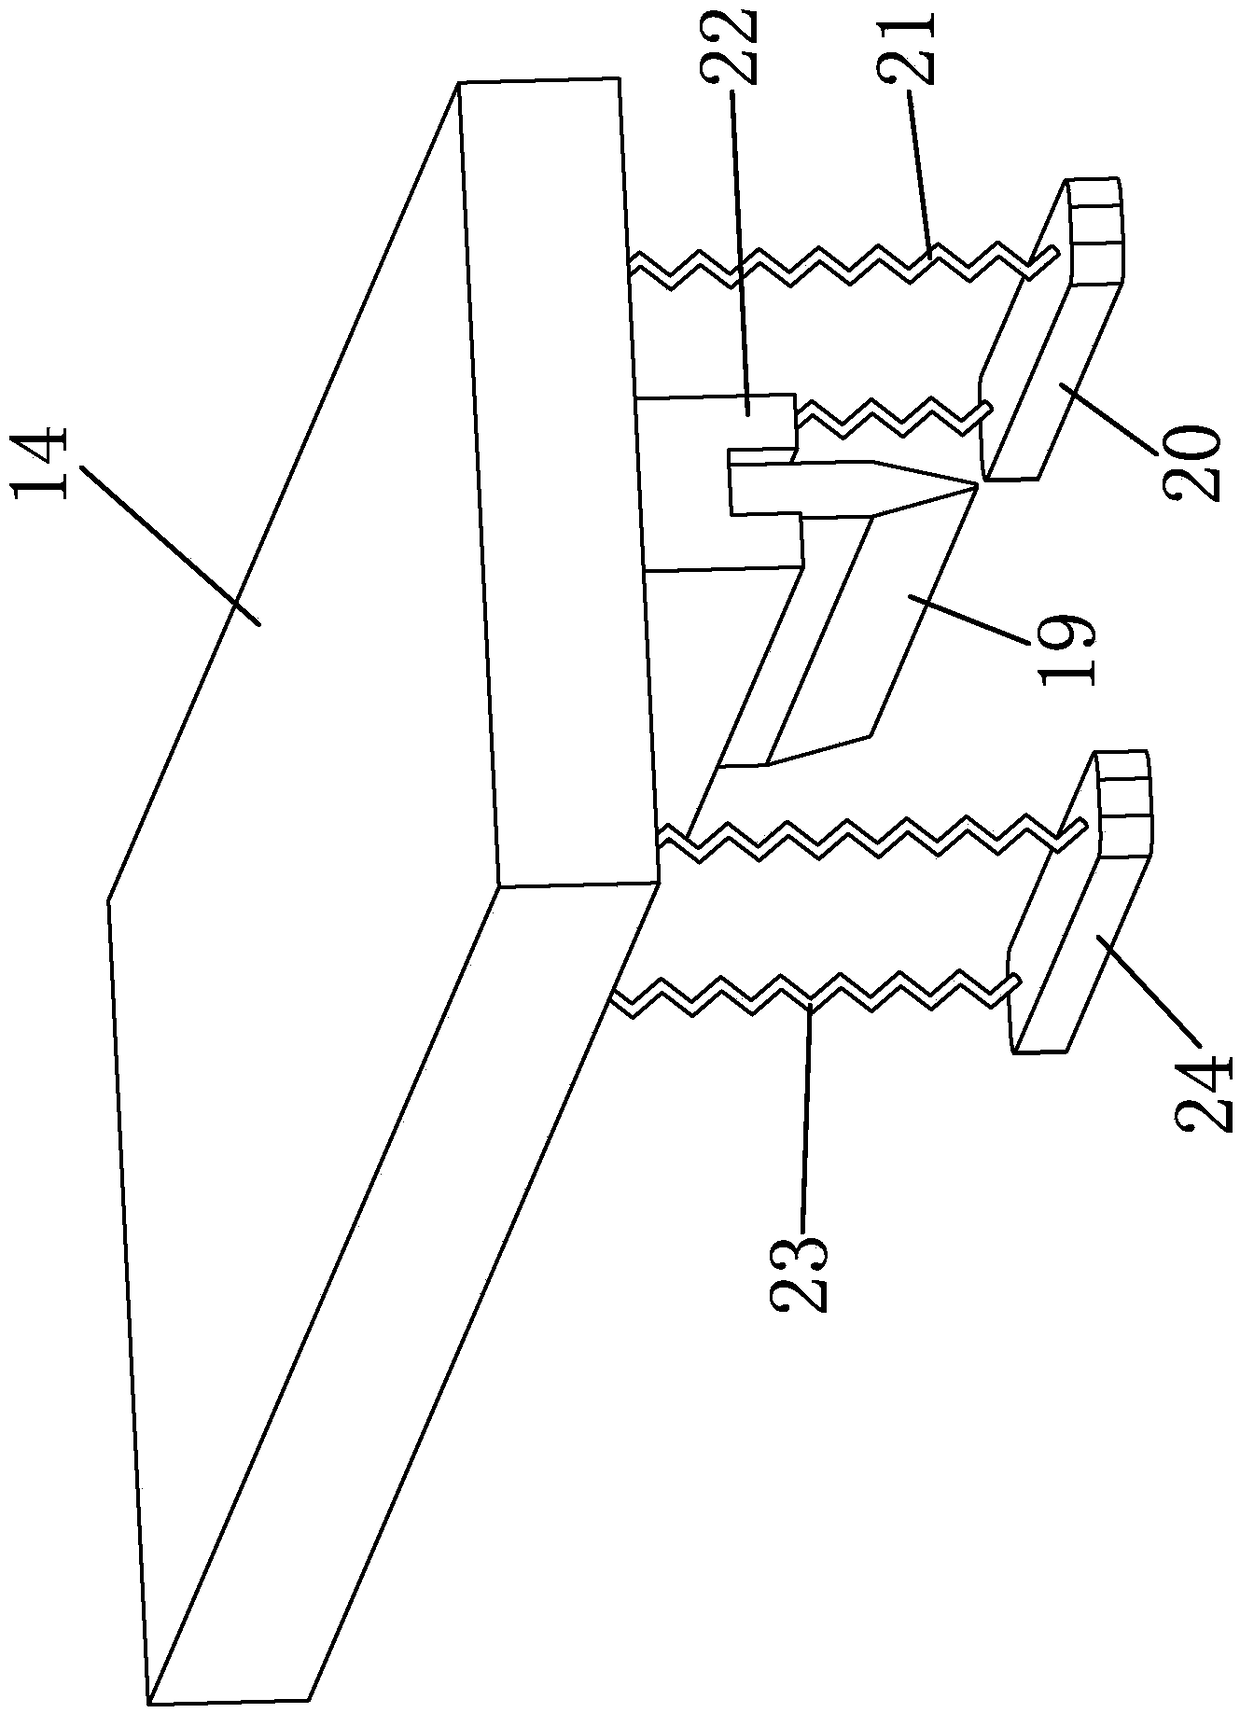 Panty-hose production method and device